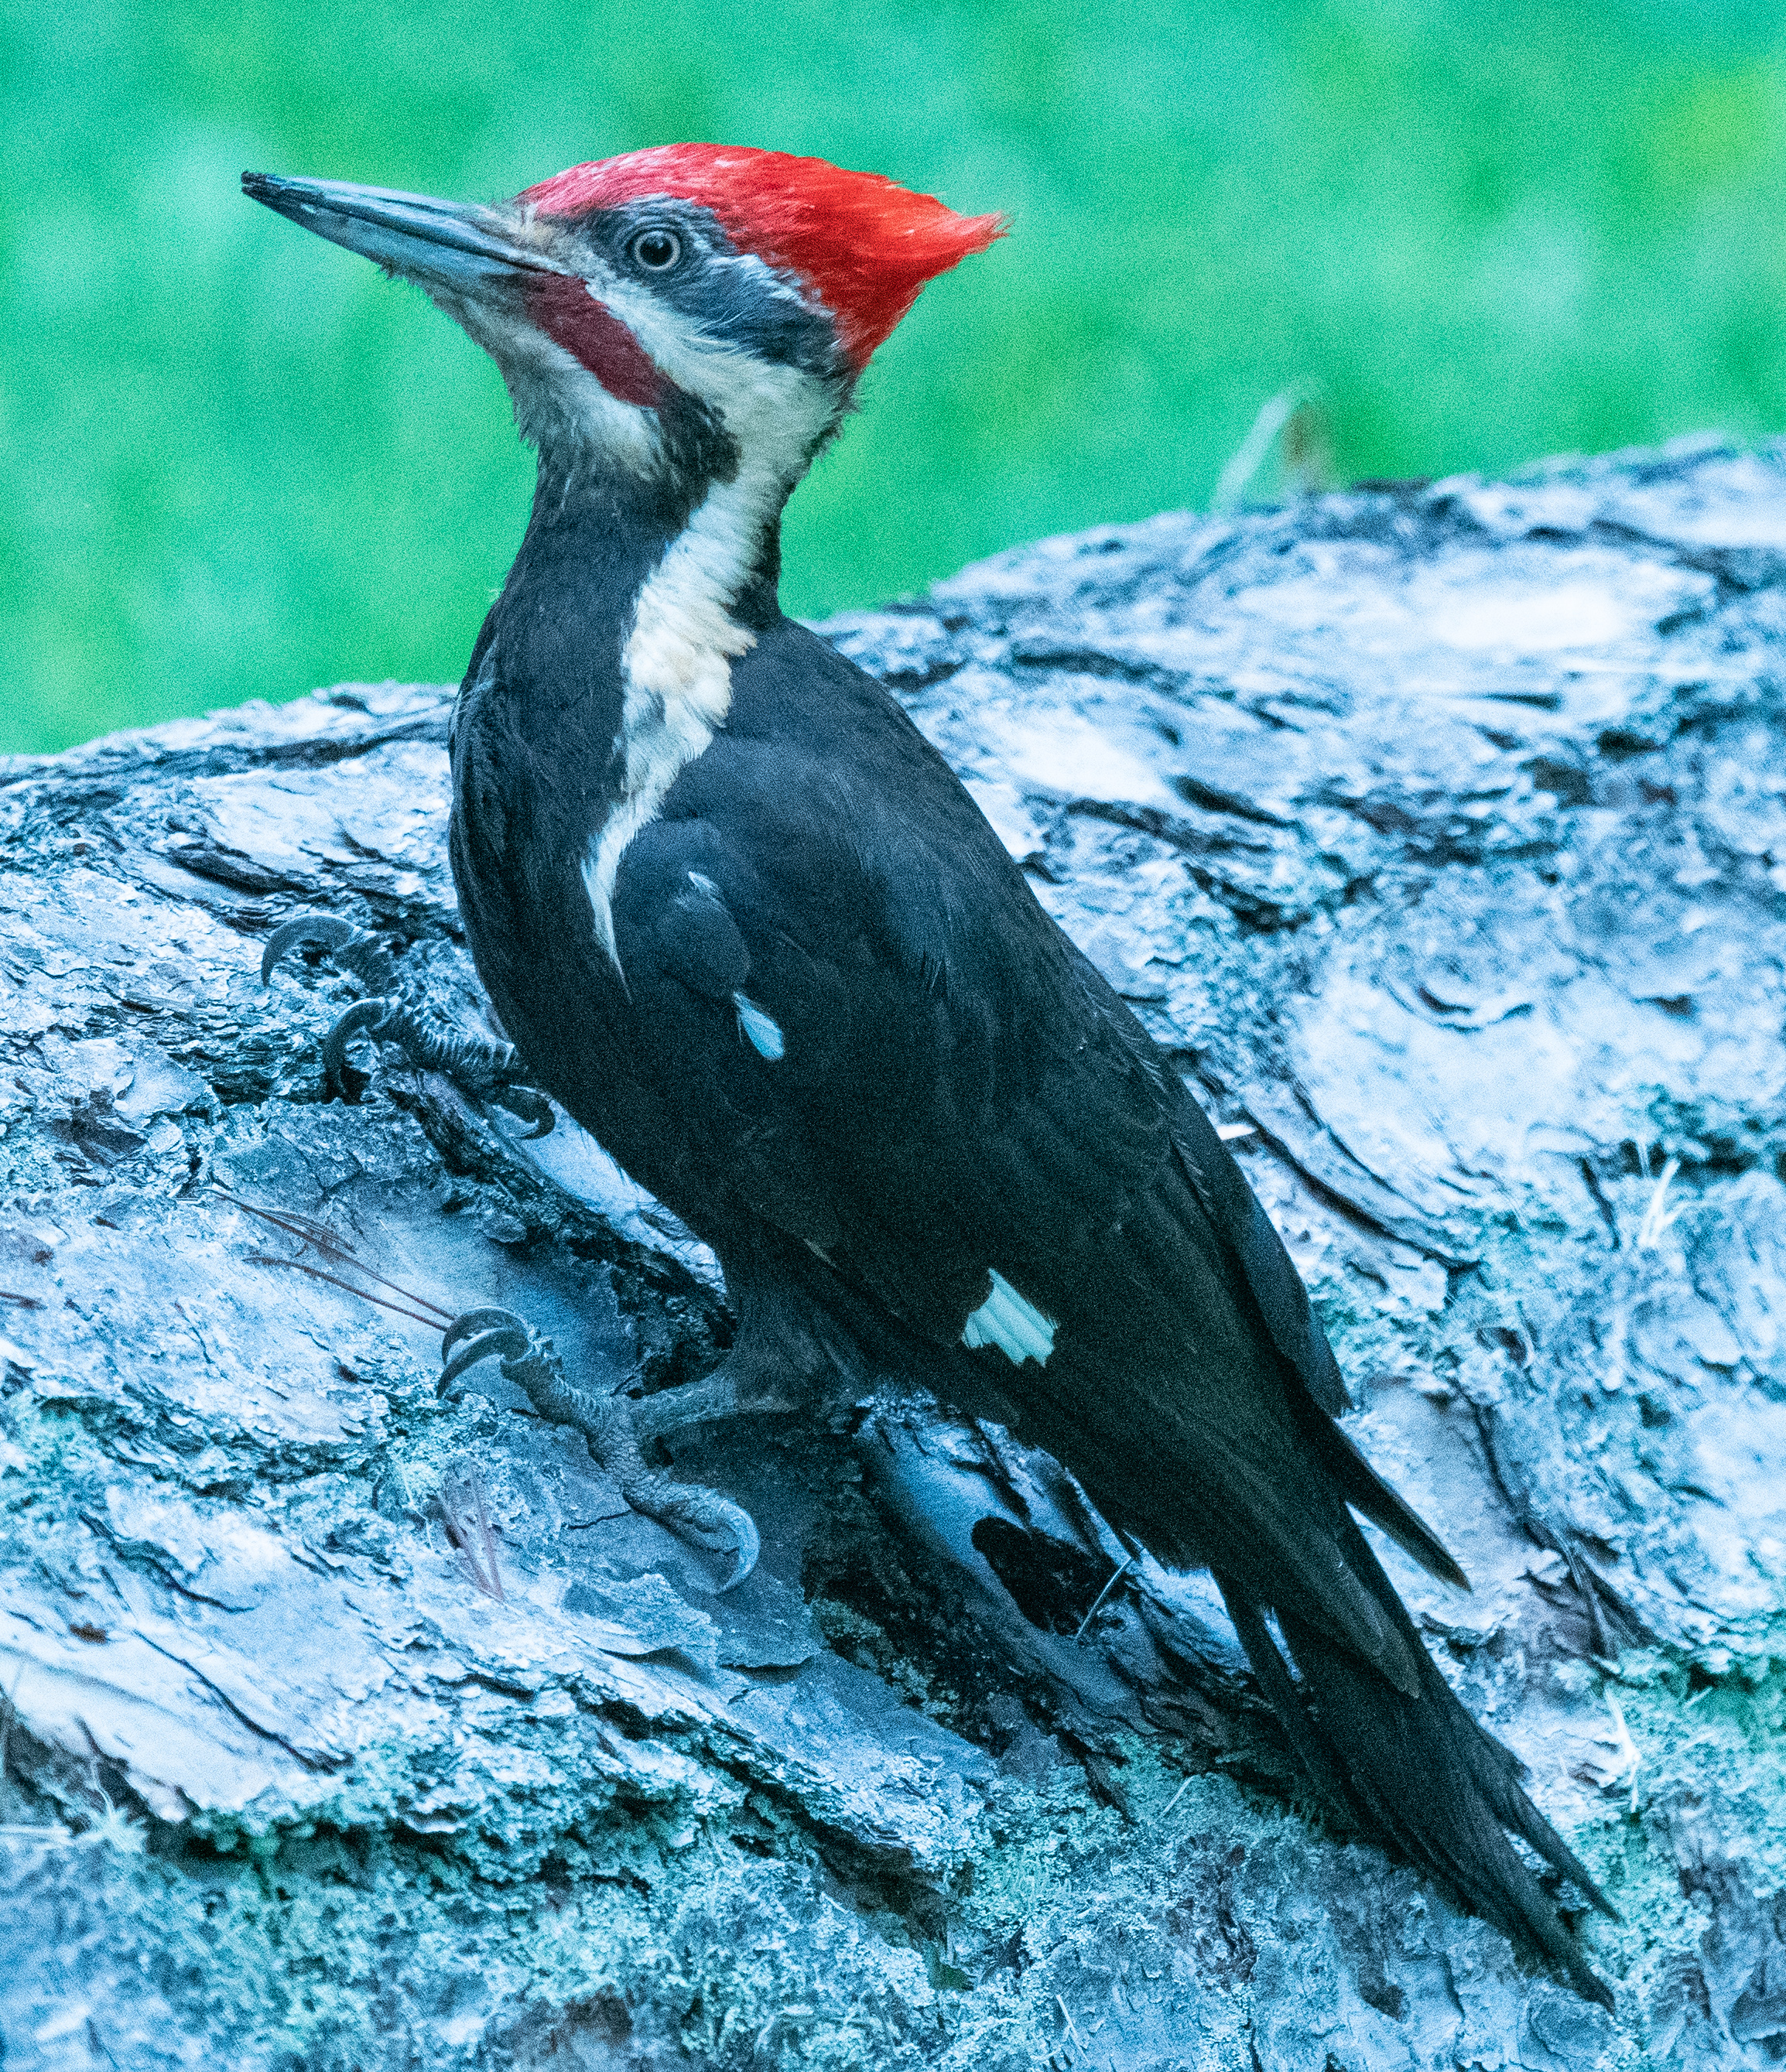 A Pileated Woodpecker in holiday mode